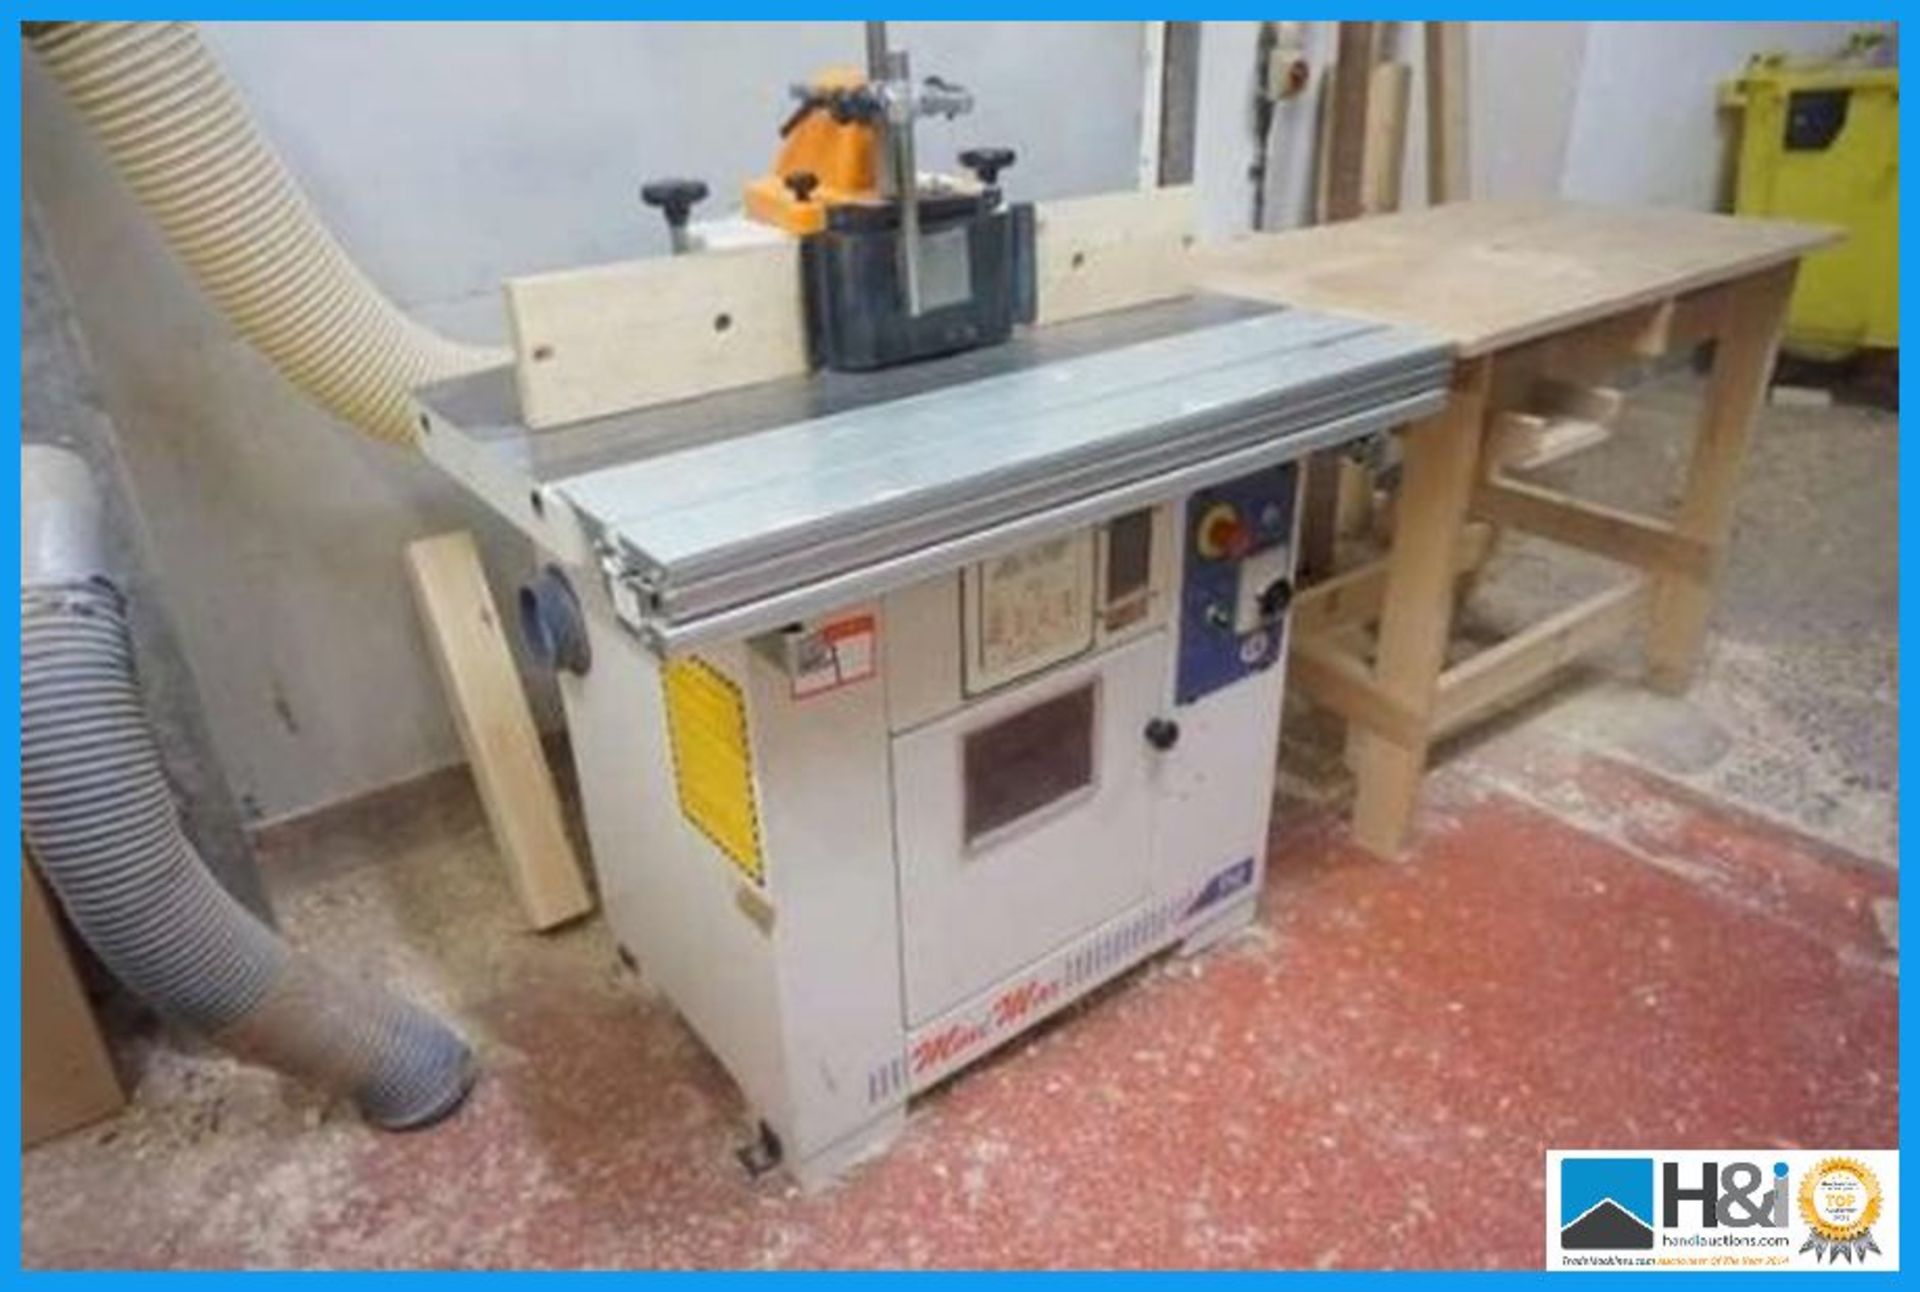 SCM Minimax T50 spindle Moulder with sliding carriage. 3 phase. Tooling not included. Comes